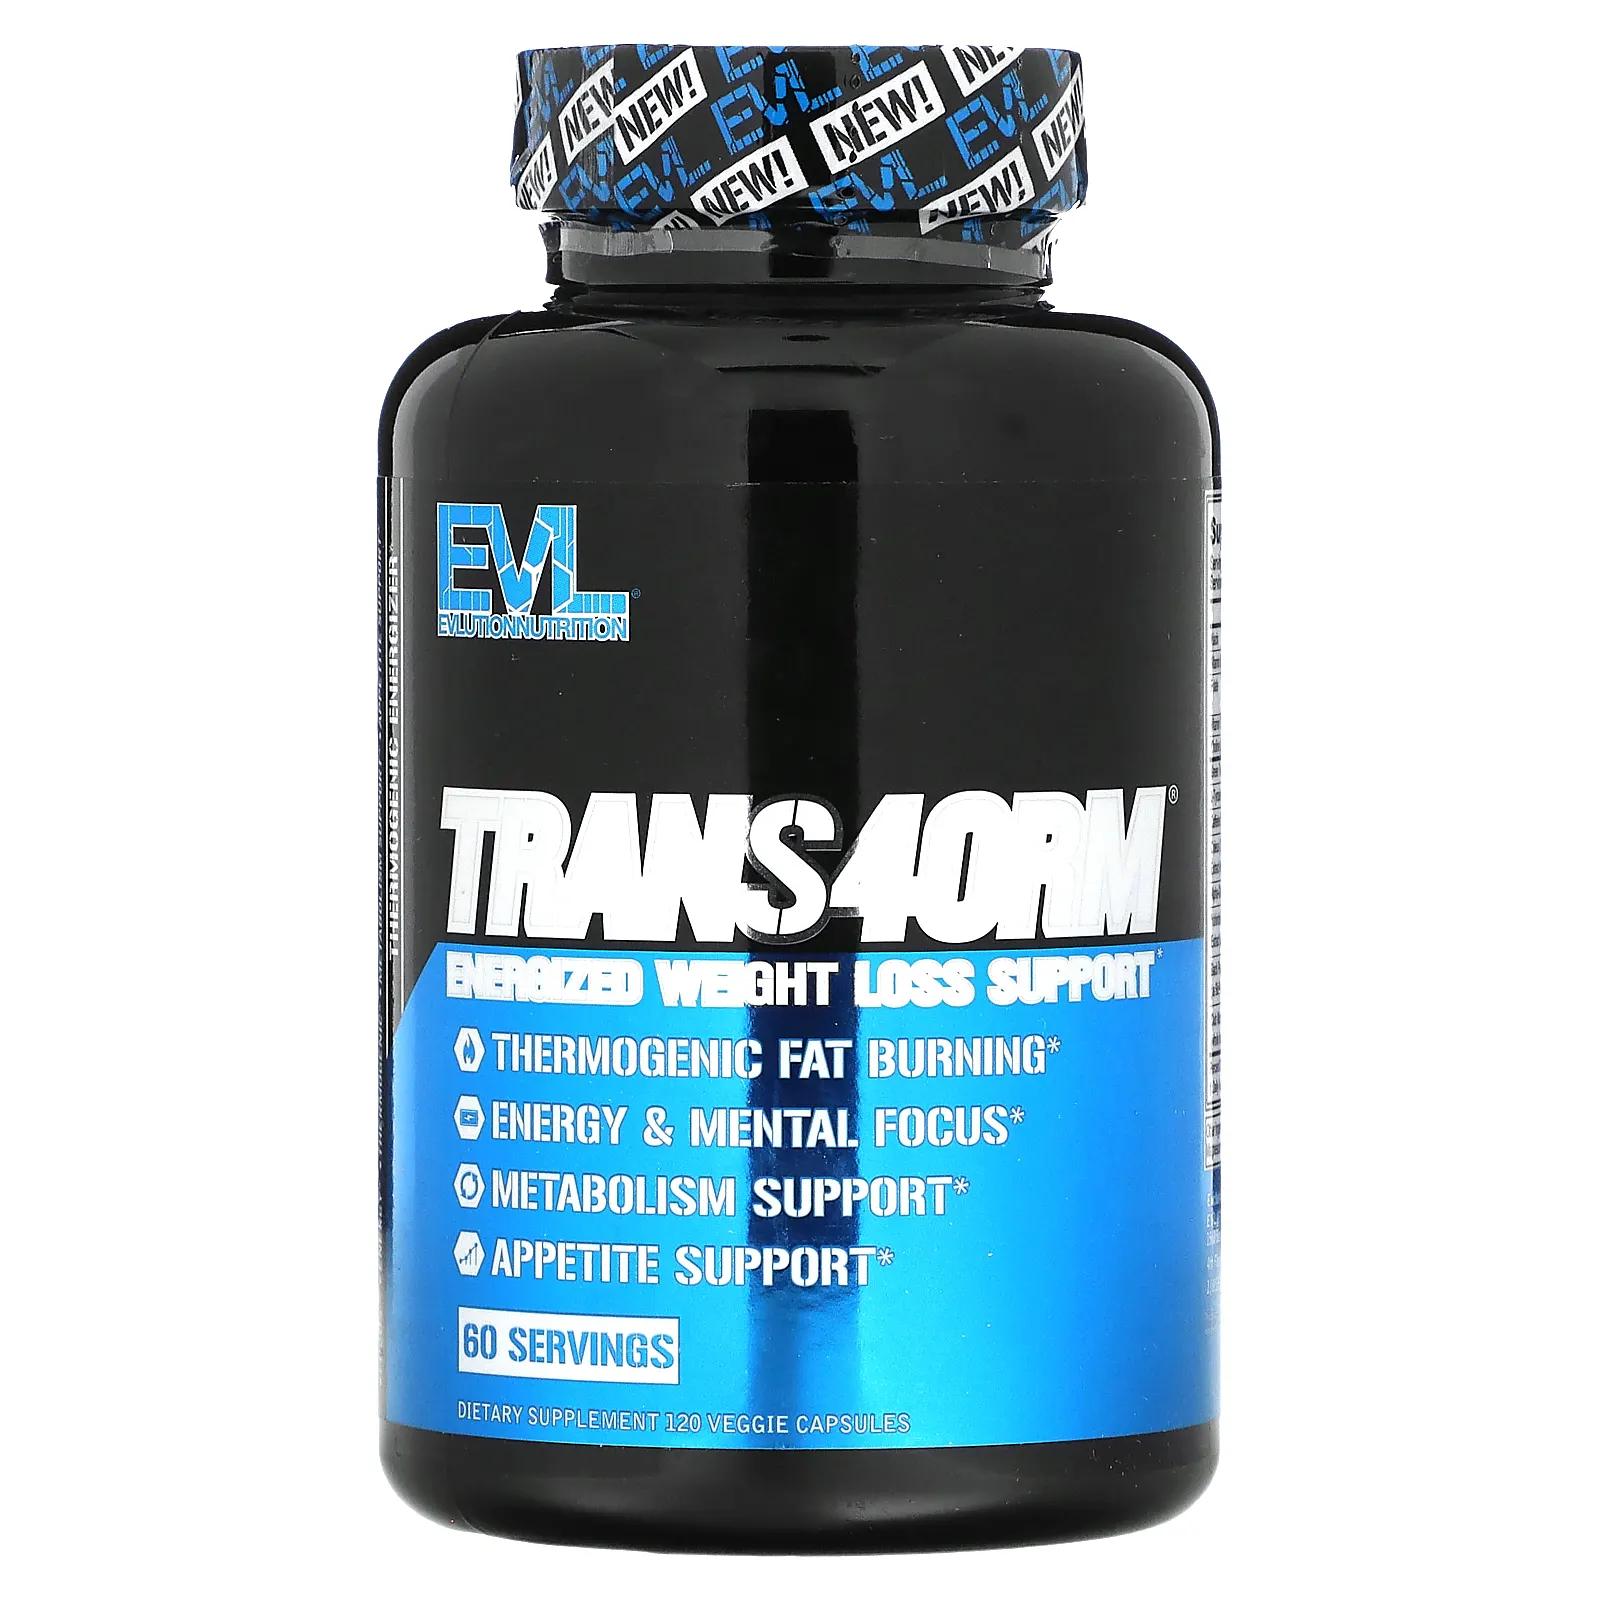 bpi roxylean fat burner 60 capsules EVLution Nutrition Trans4orm Thermogenic Energizing Fat Burner Supplement 120 Capsules